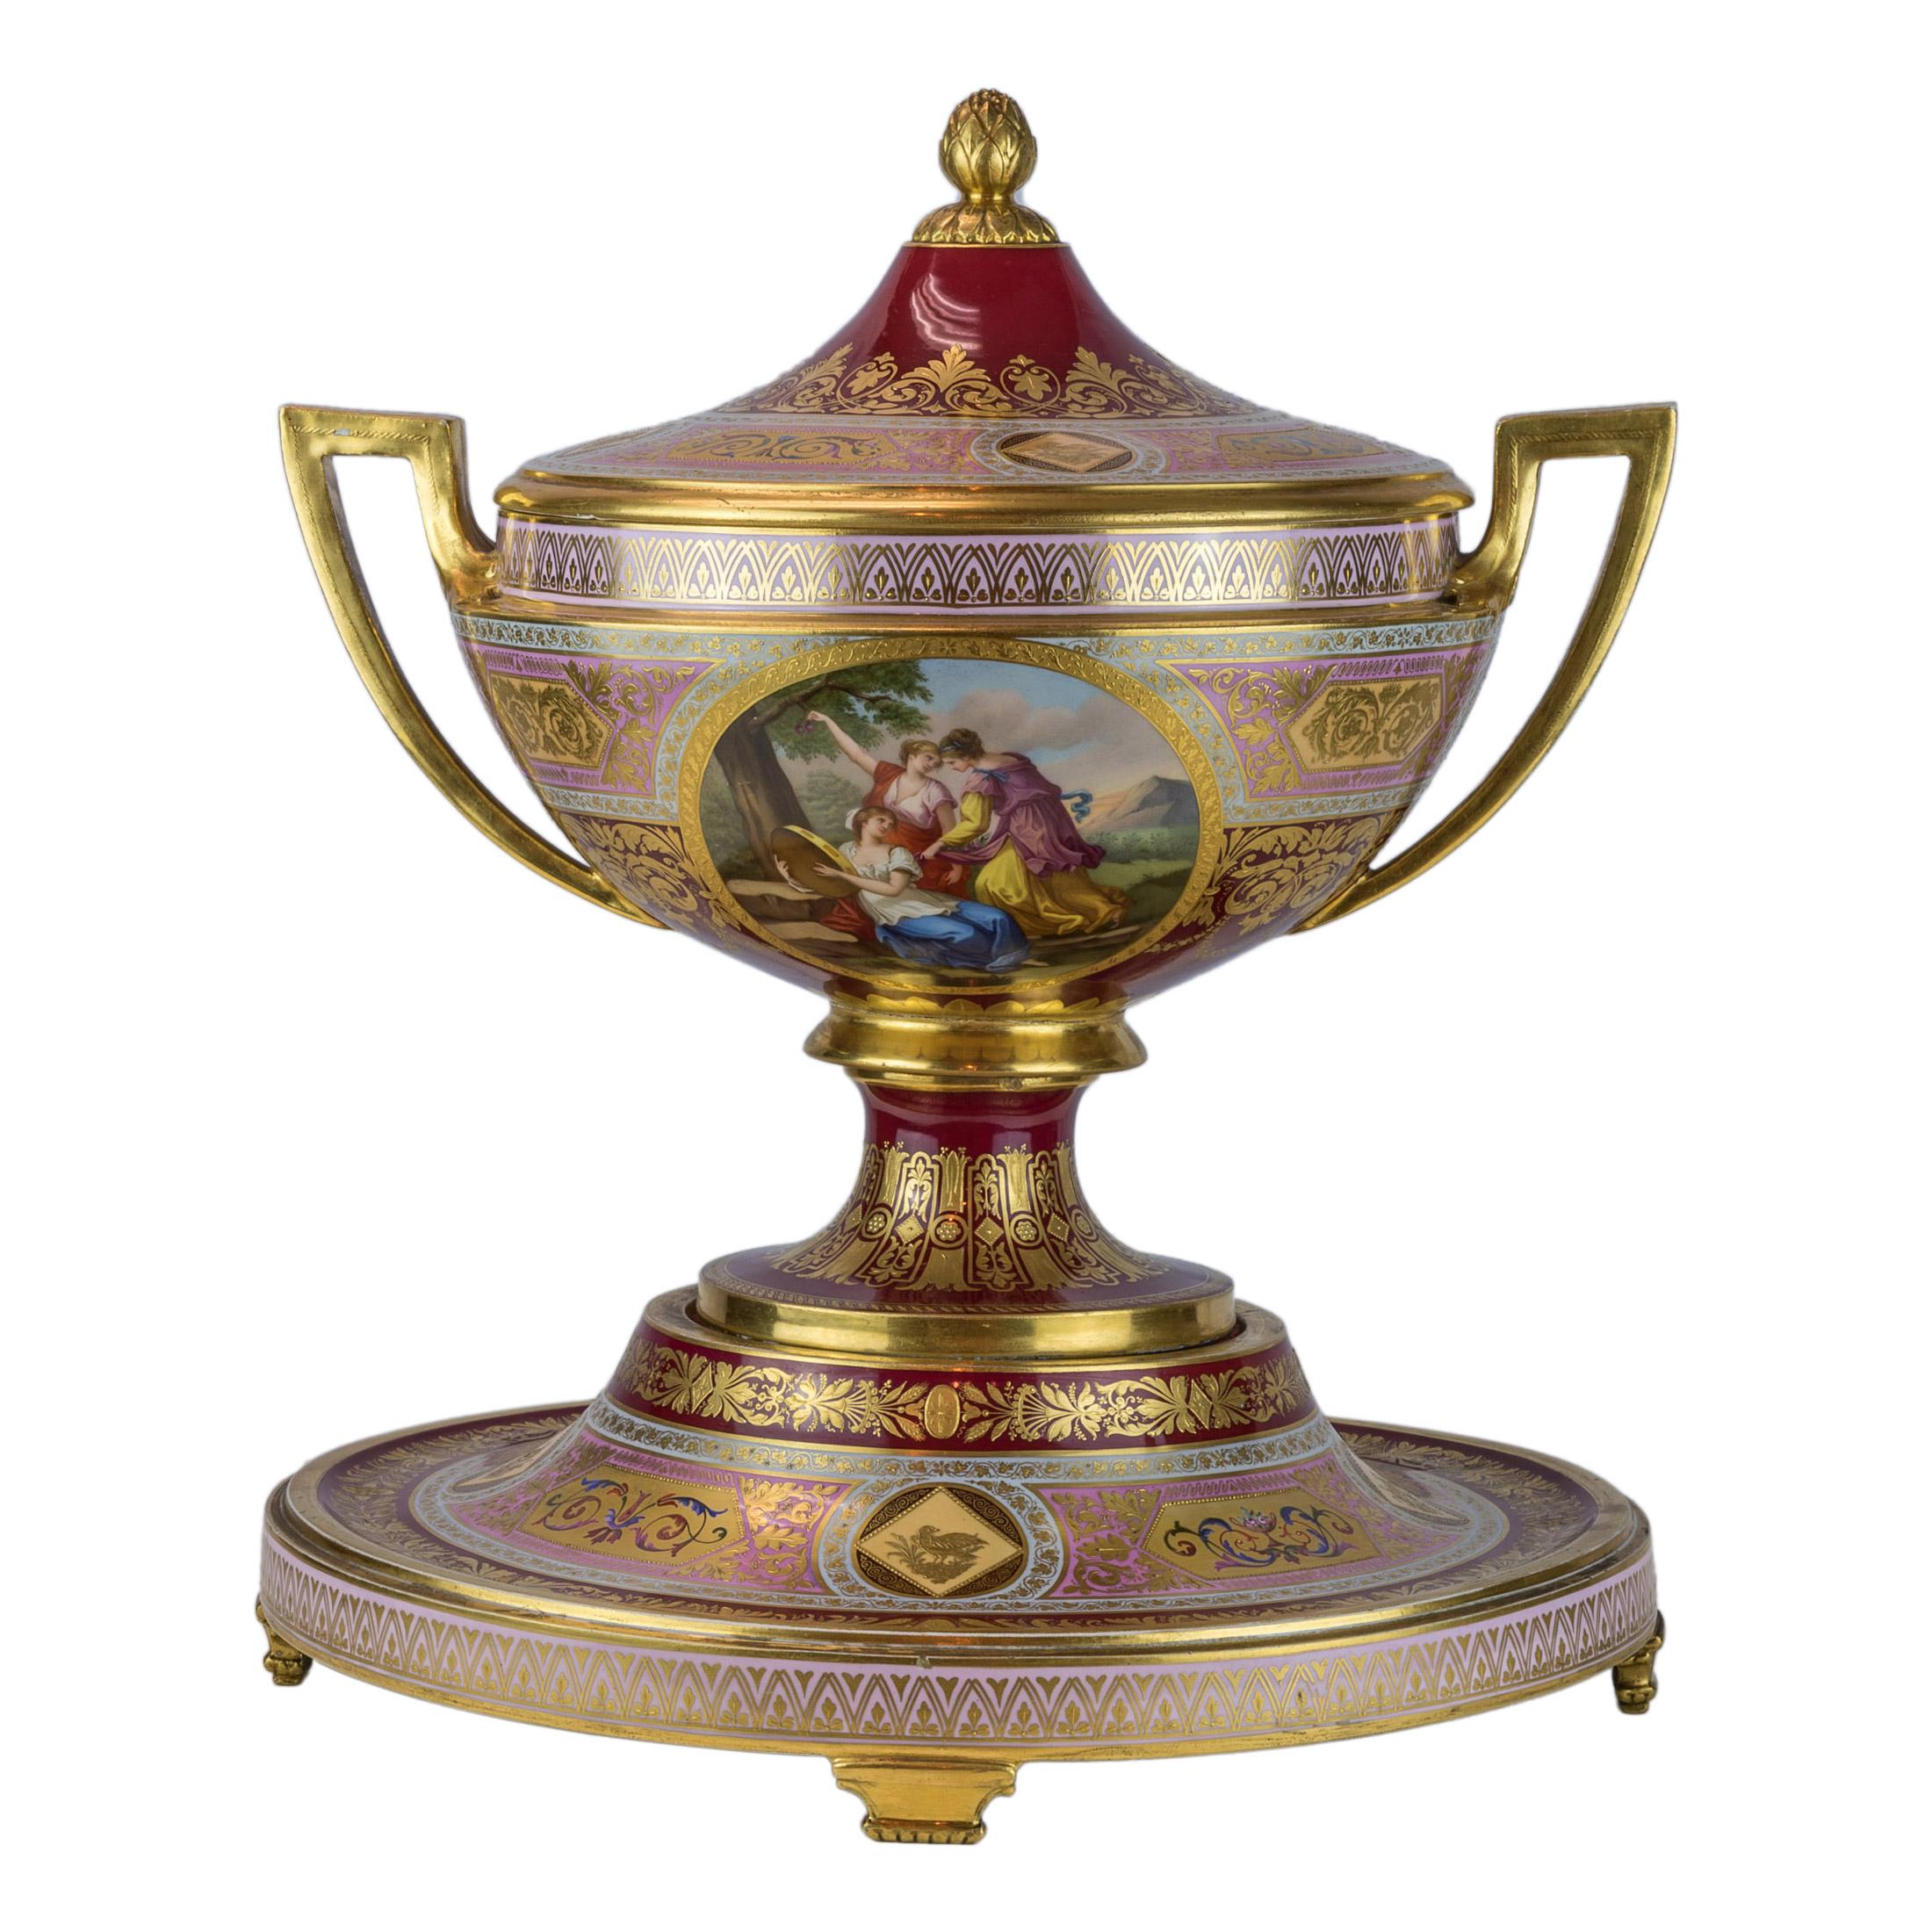 A fine Royal Vienna ruby red and pink porcelain covered centrepiece and stand
Scenic decorated three section centrepiece with a beehive mark on the underside. 

Date: 20th century
Origin: Austria
Size: 18 in high x 15 3/4 in wide (base); 10 1/2